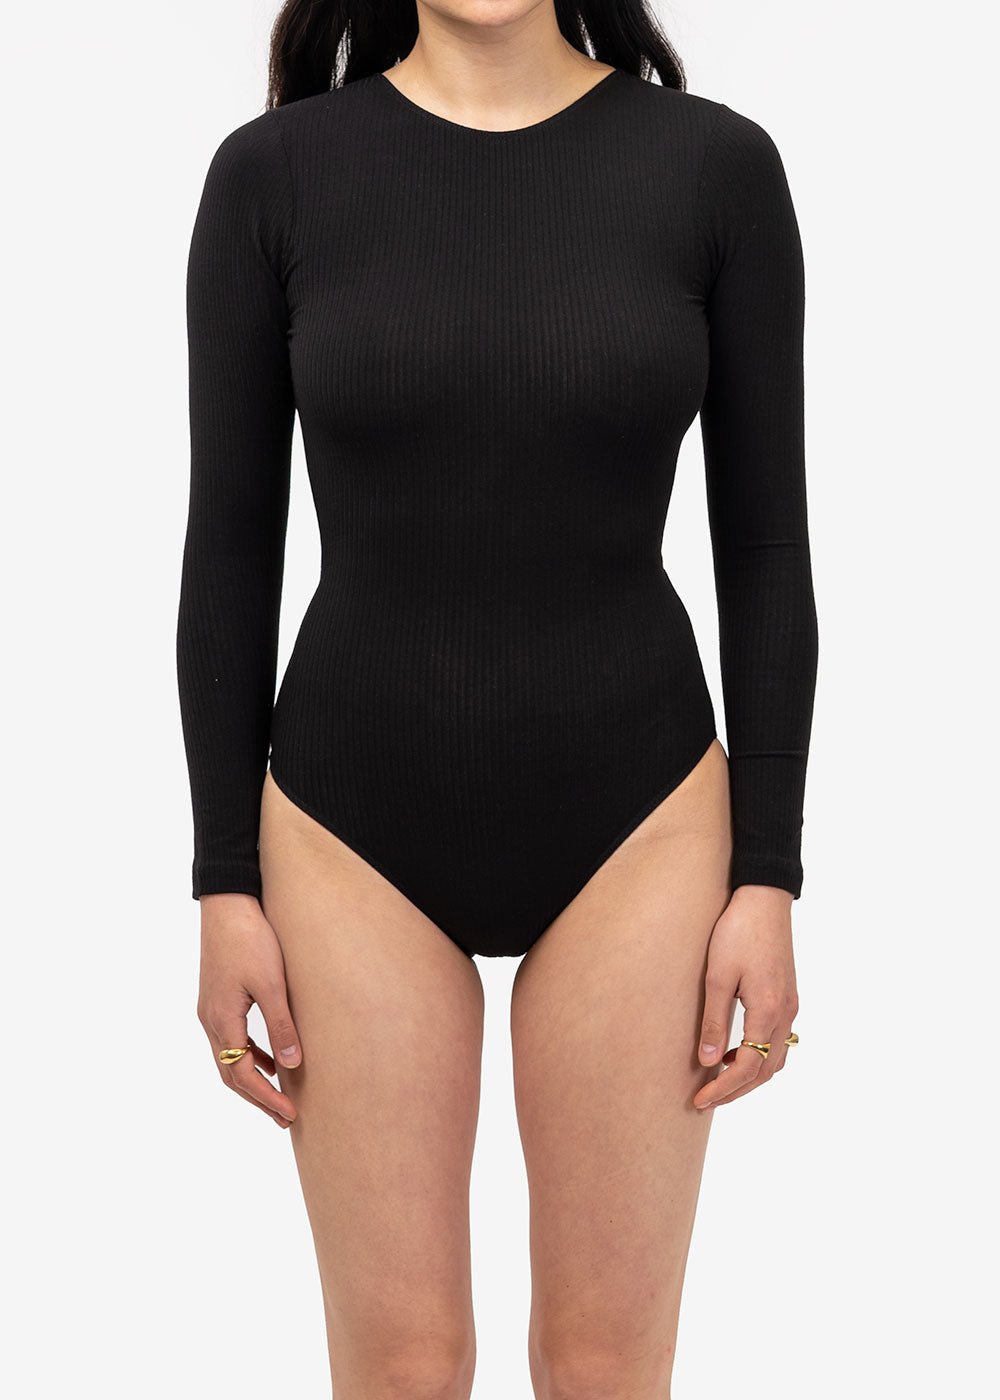 Angie Bauer Mulberry Bodysuit — Shop sustainable fashion and slow fashion at New Classics Studios